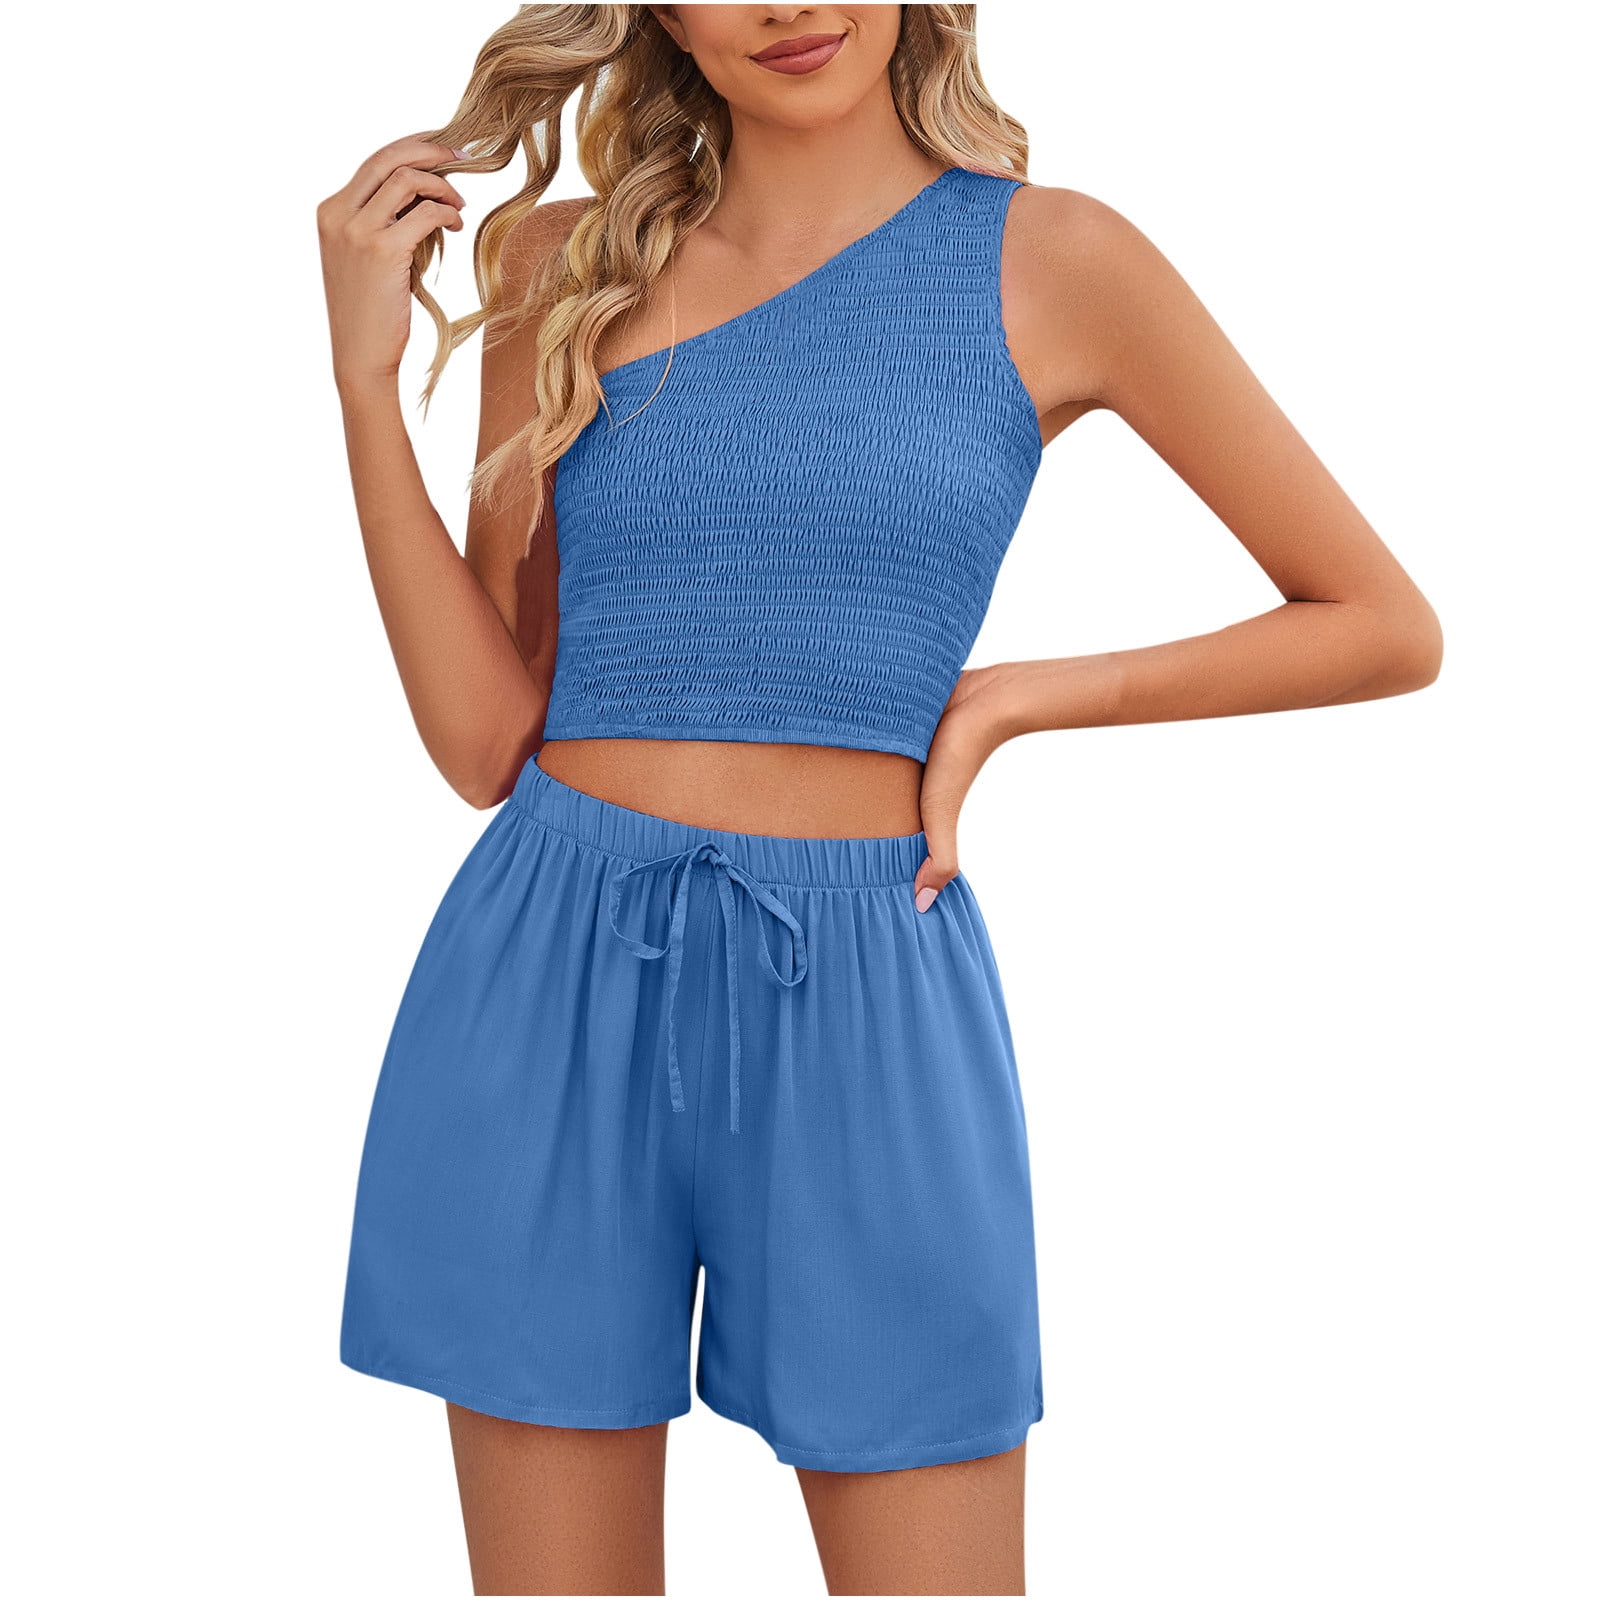 REORIAFEE Women Outfits Sets Cute Summer Outfits Summer Suit Vest Casual  Short Sleeveless Cropped Fashion Body Women Clothing Blue S 